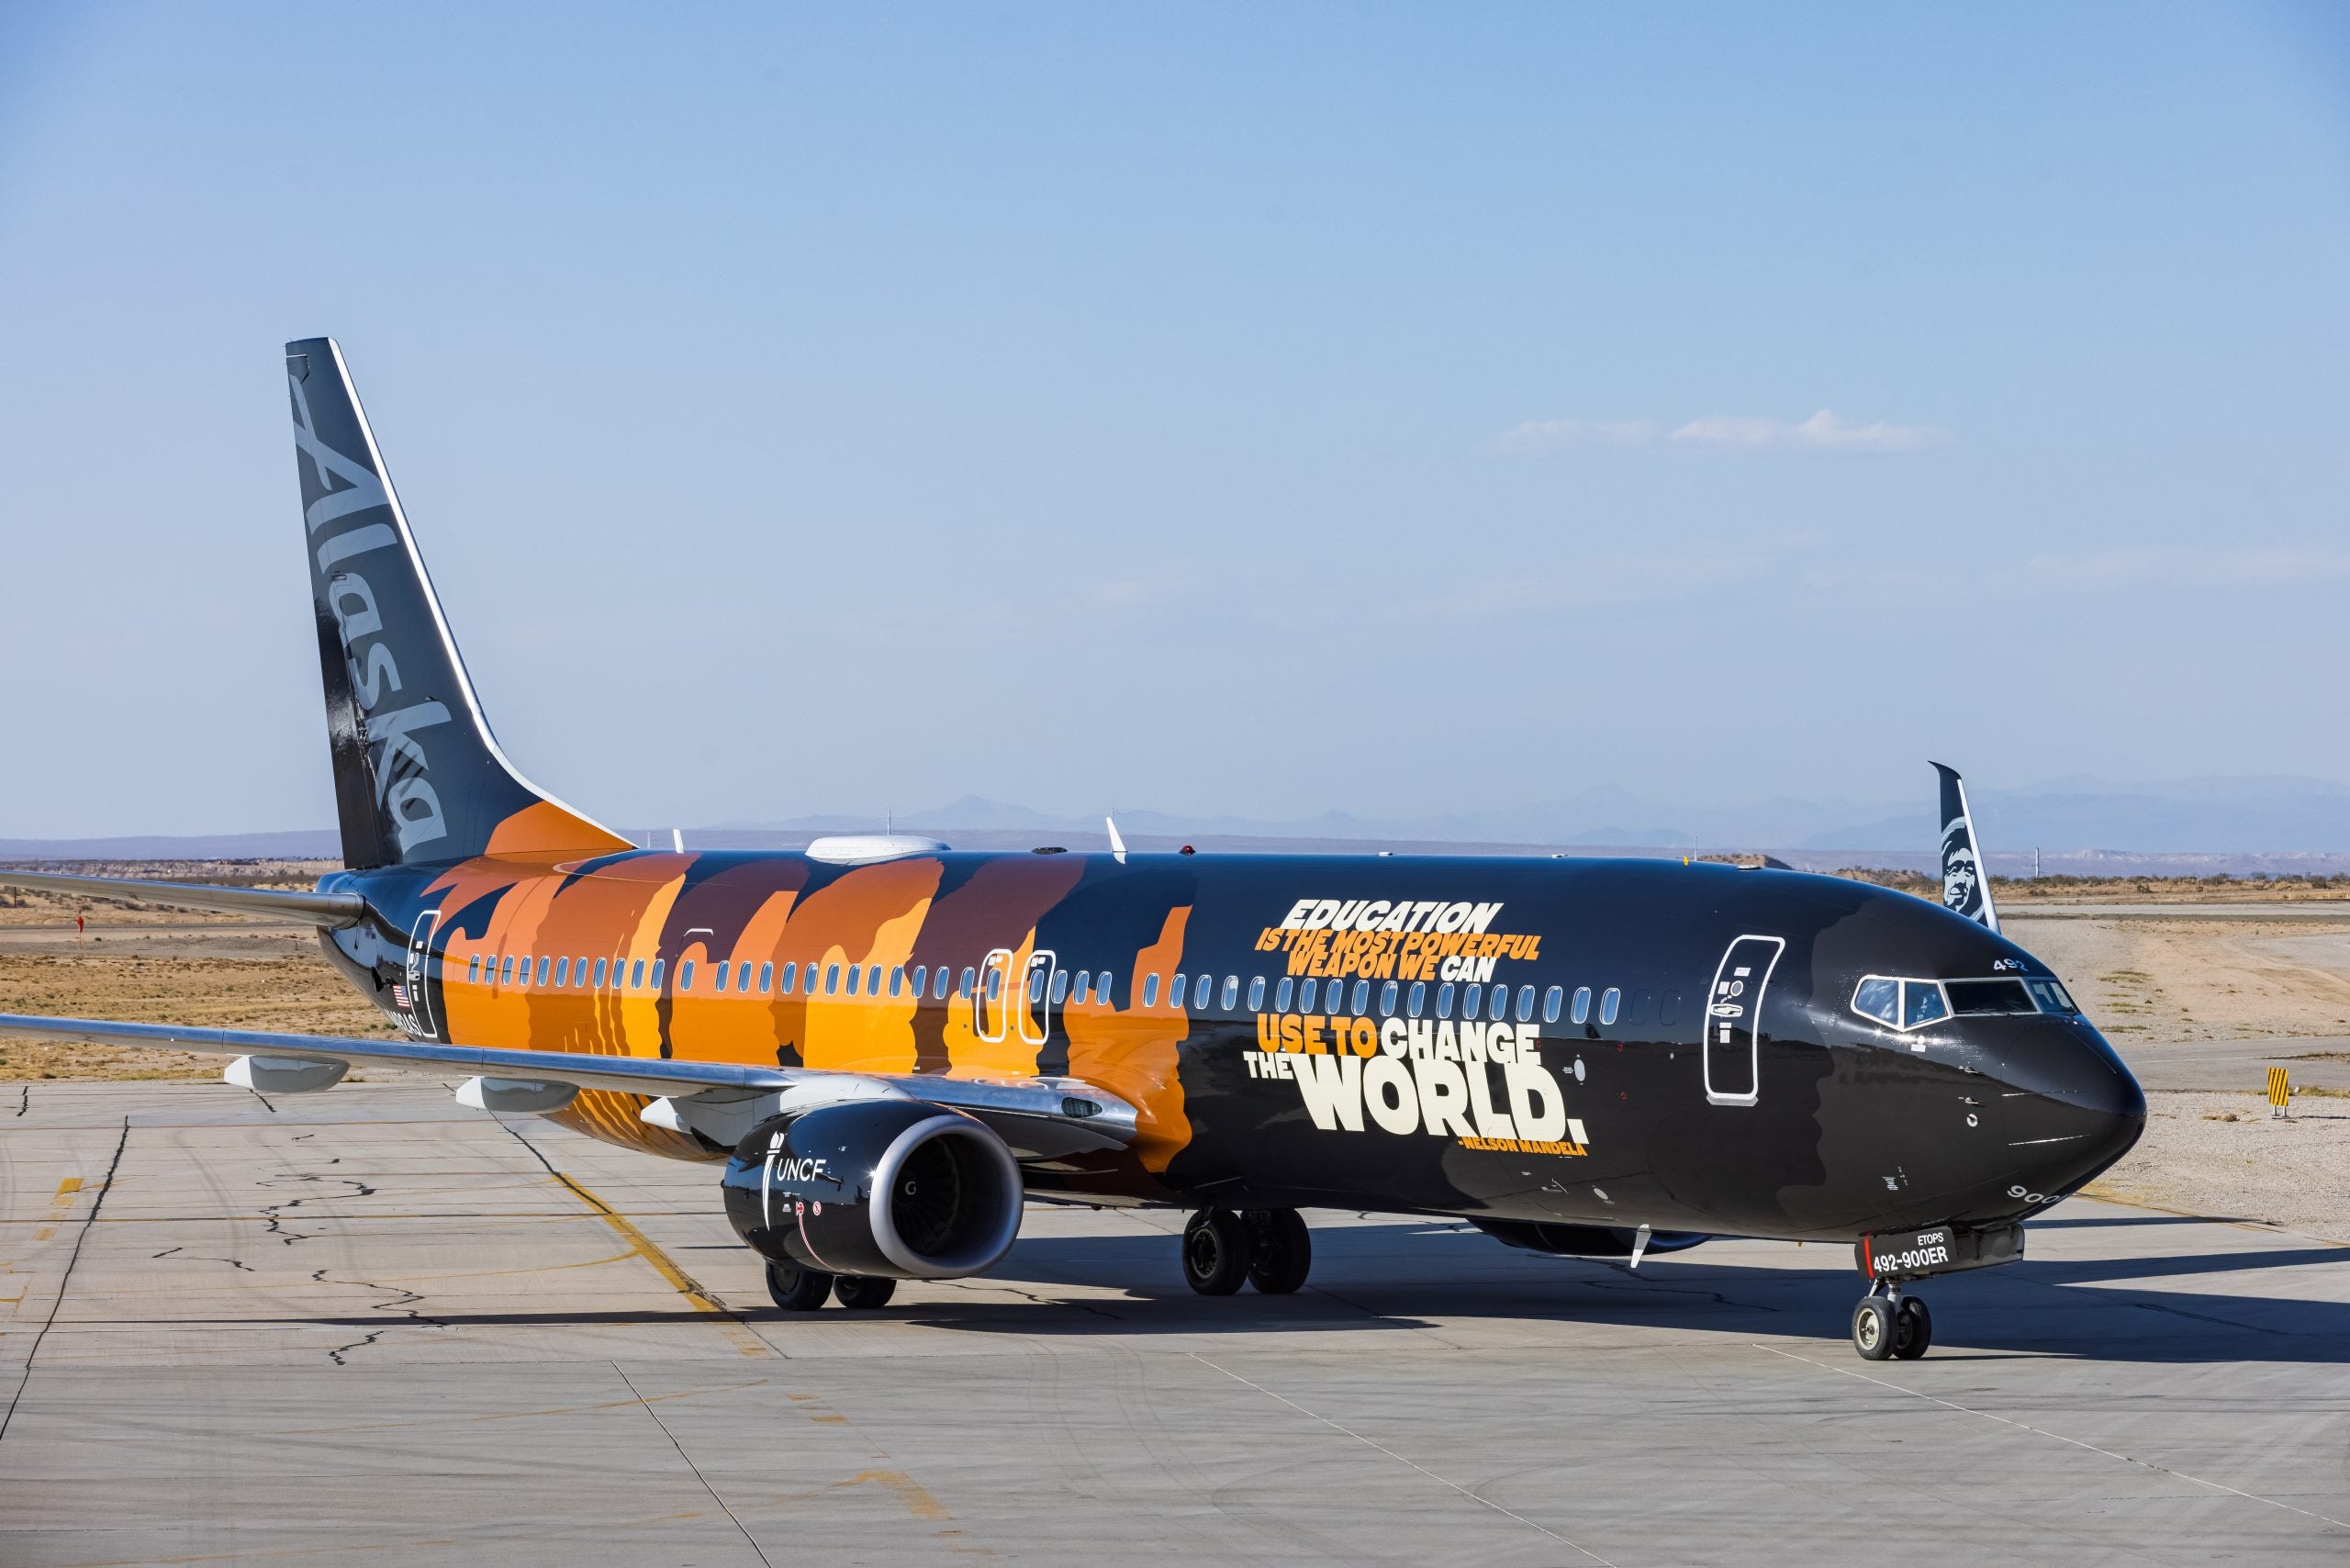 New Alaska Airlines 'Our Commitment' livery spotlights diversity